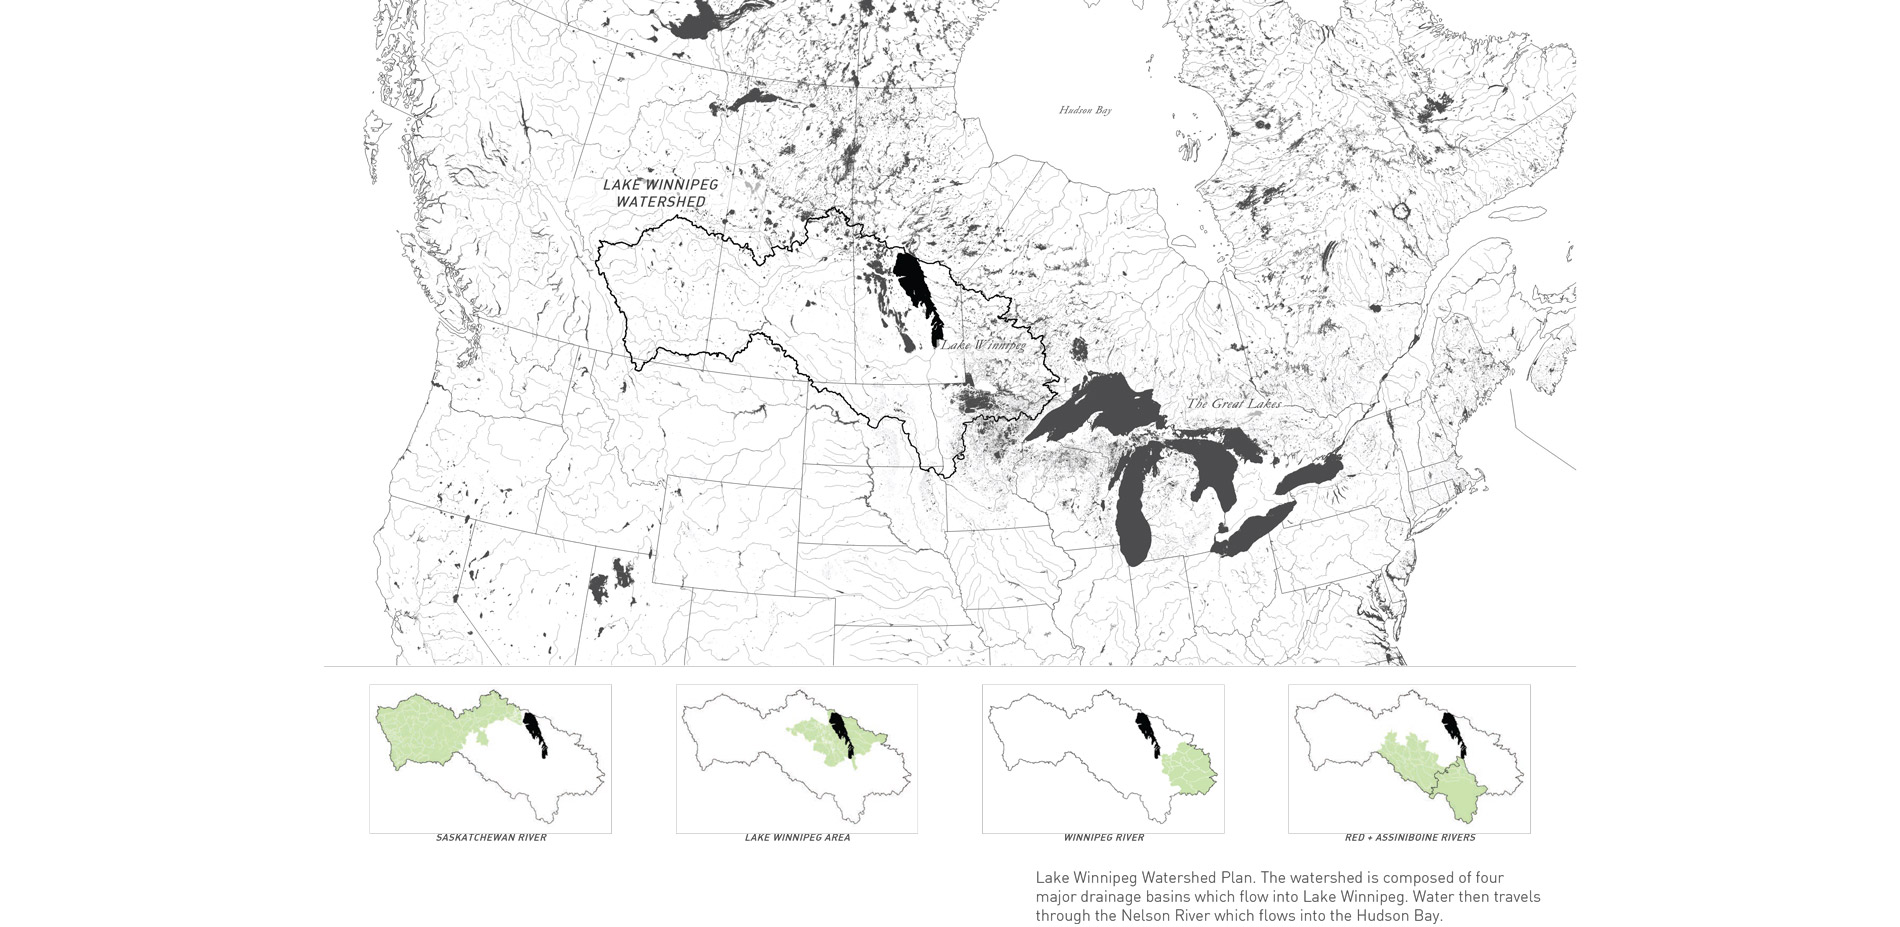 Lake Winnipeg Watershed Plan. The watershed is composed of four major drainage basins which flow into Lake Winnipeg. Water then travels through the Ne…